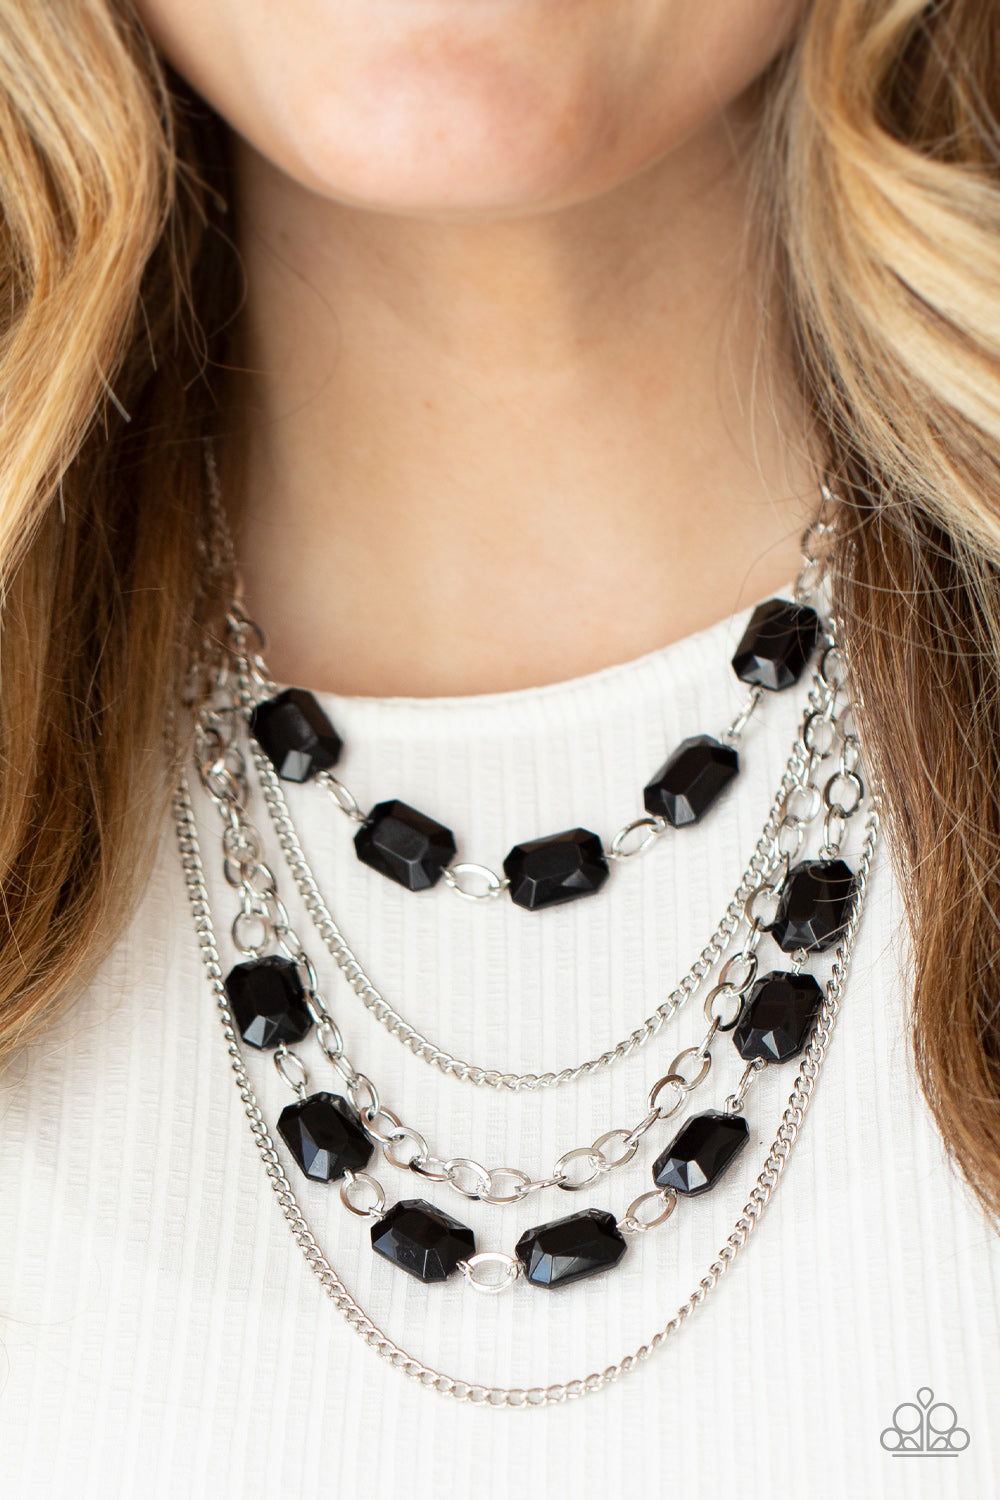 PRE-ORDER - Paparazzi Standout Strands - Black - Necklace & Earrings - $5 Jewelry with Ashley Swint